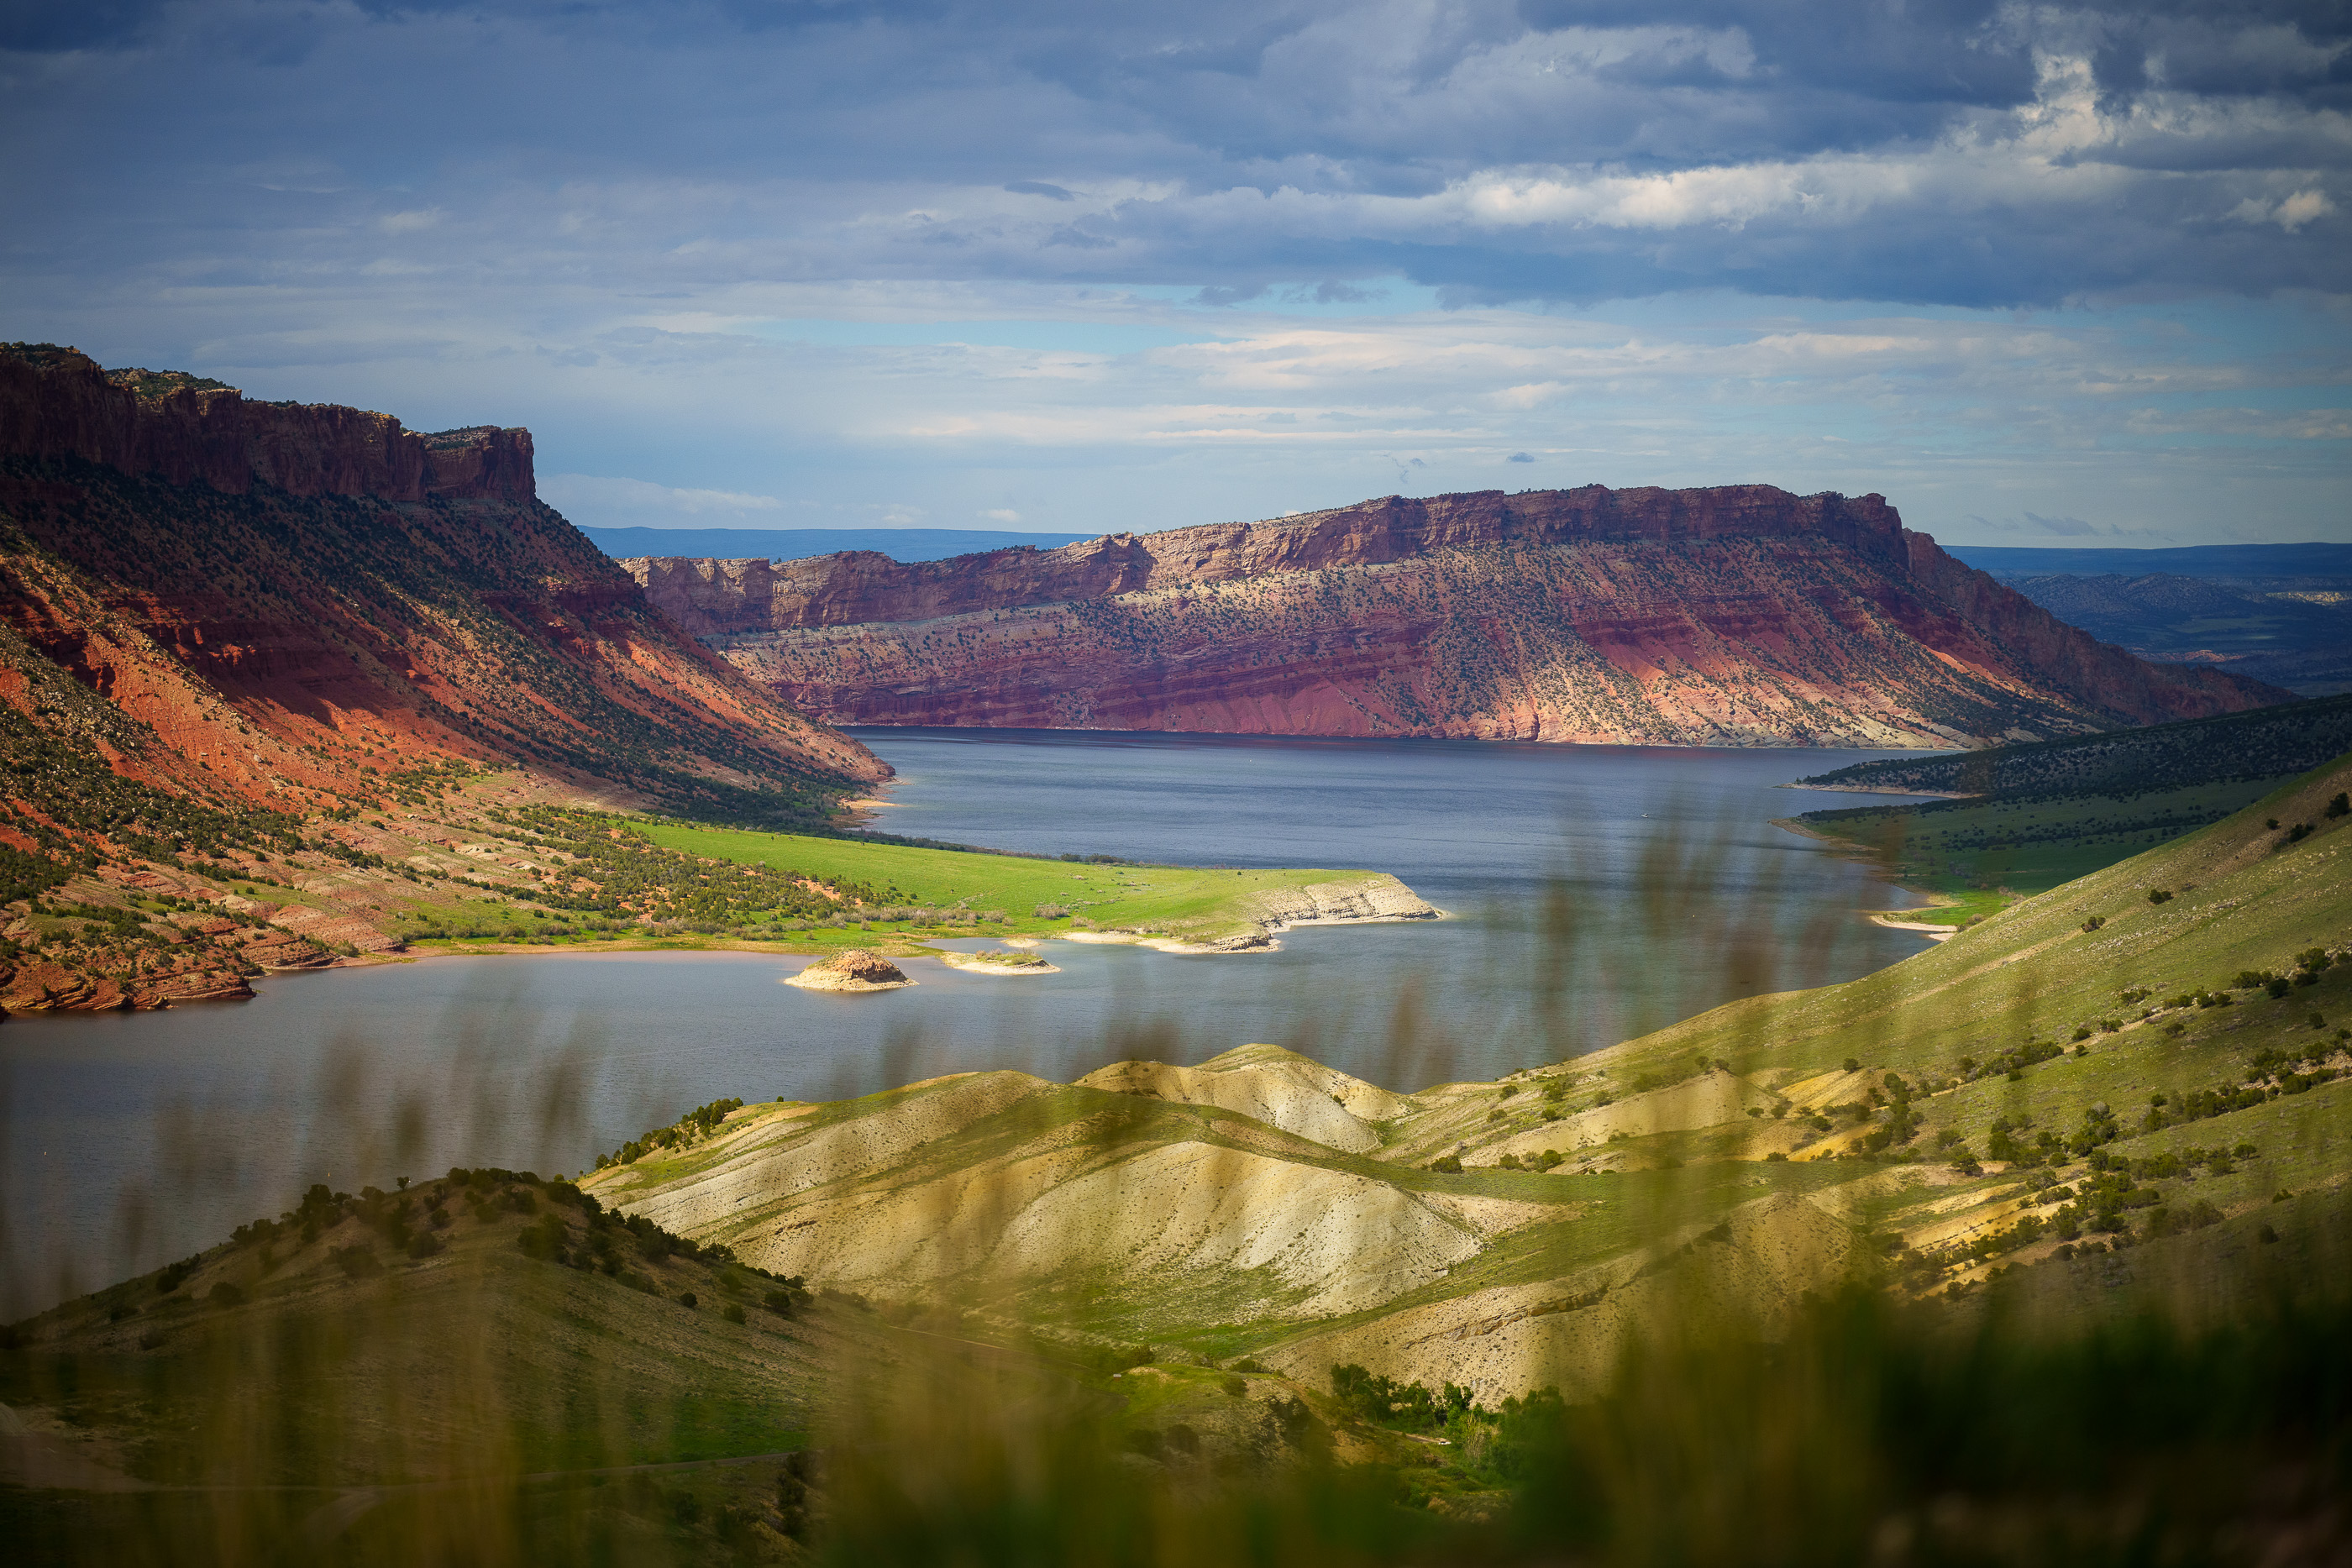 Wyoming's Flaming Gorge recedes as U.S. megadrought creeps further north